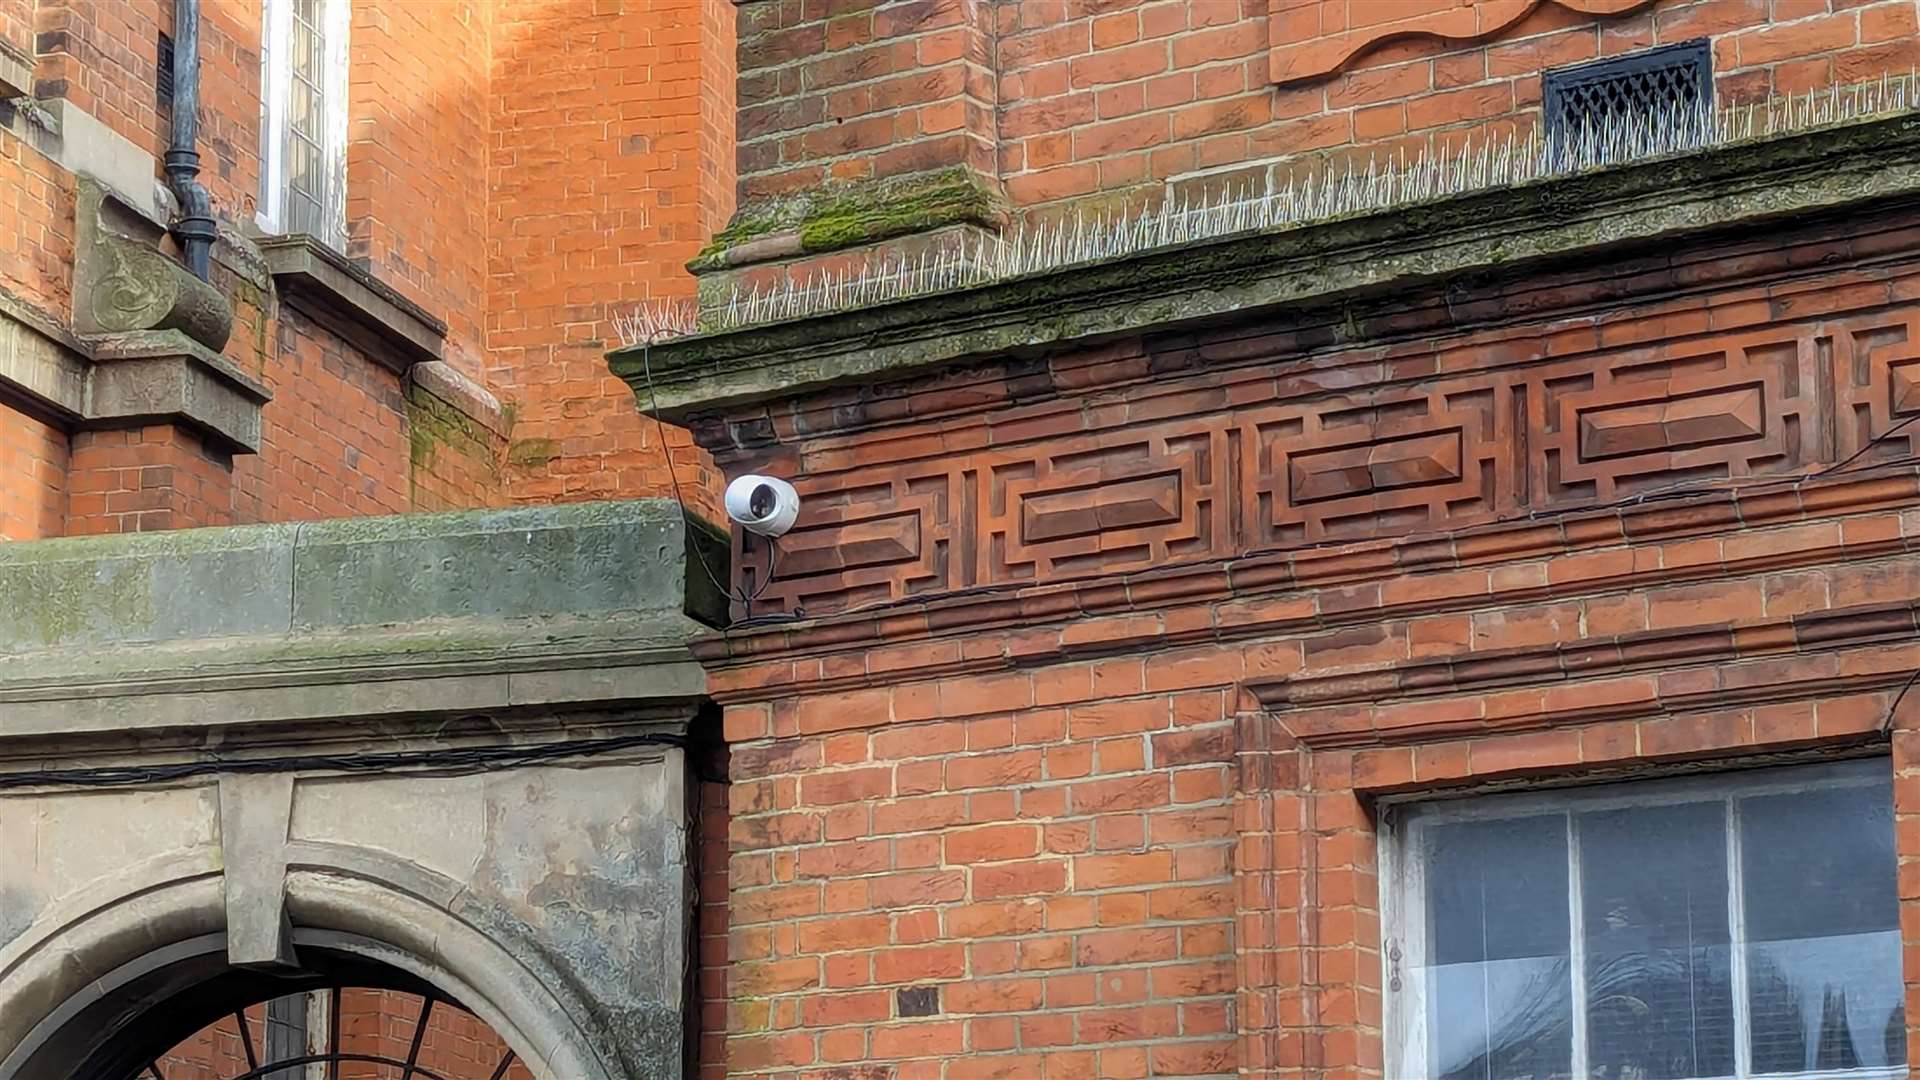 KCC installed six white CCTV cameras on the Grade II-listed building without obtaining listed building consent